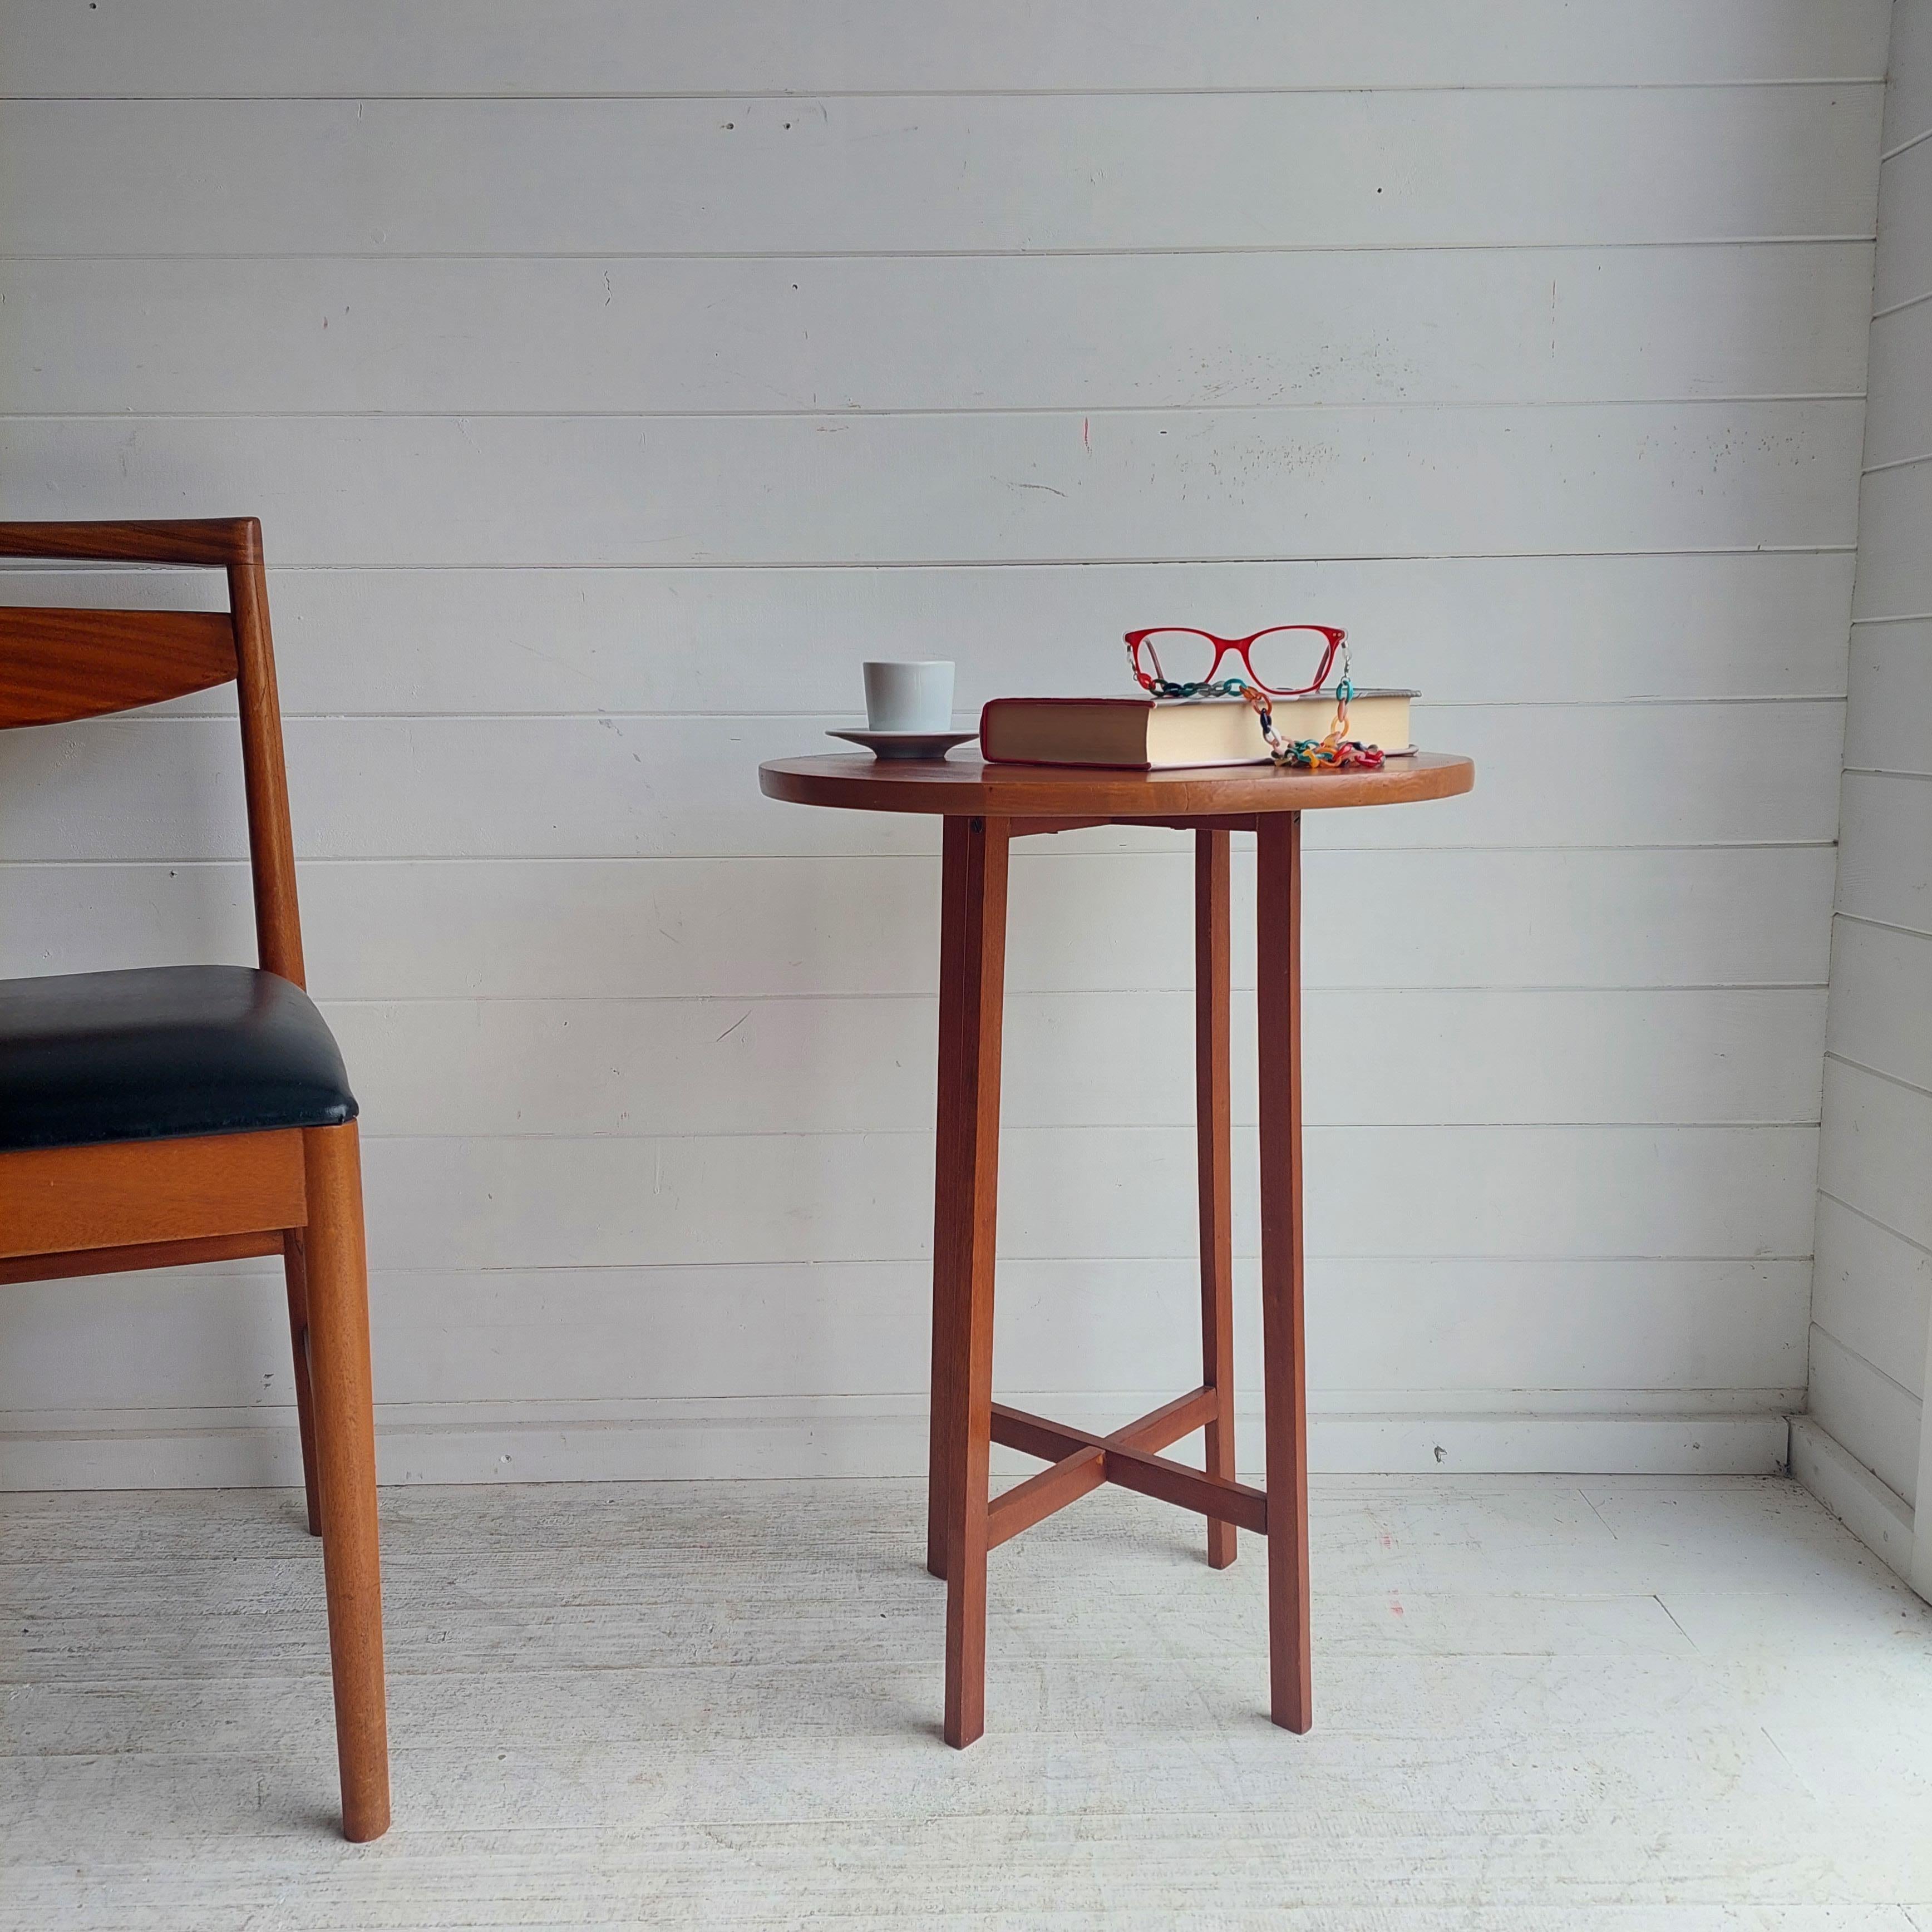 Mid Century teak side table from the 1960s
Beautiful round Danish style side table in teak.

In the manner of Poul Hundevad  nest of tables, but bigger and not foldable.
A cute light mid-century style side table
Tall, sleek and light in sight.

Teak